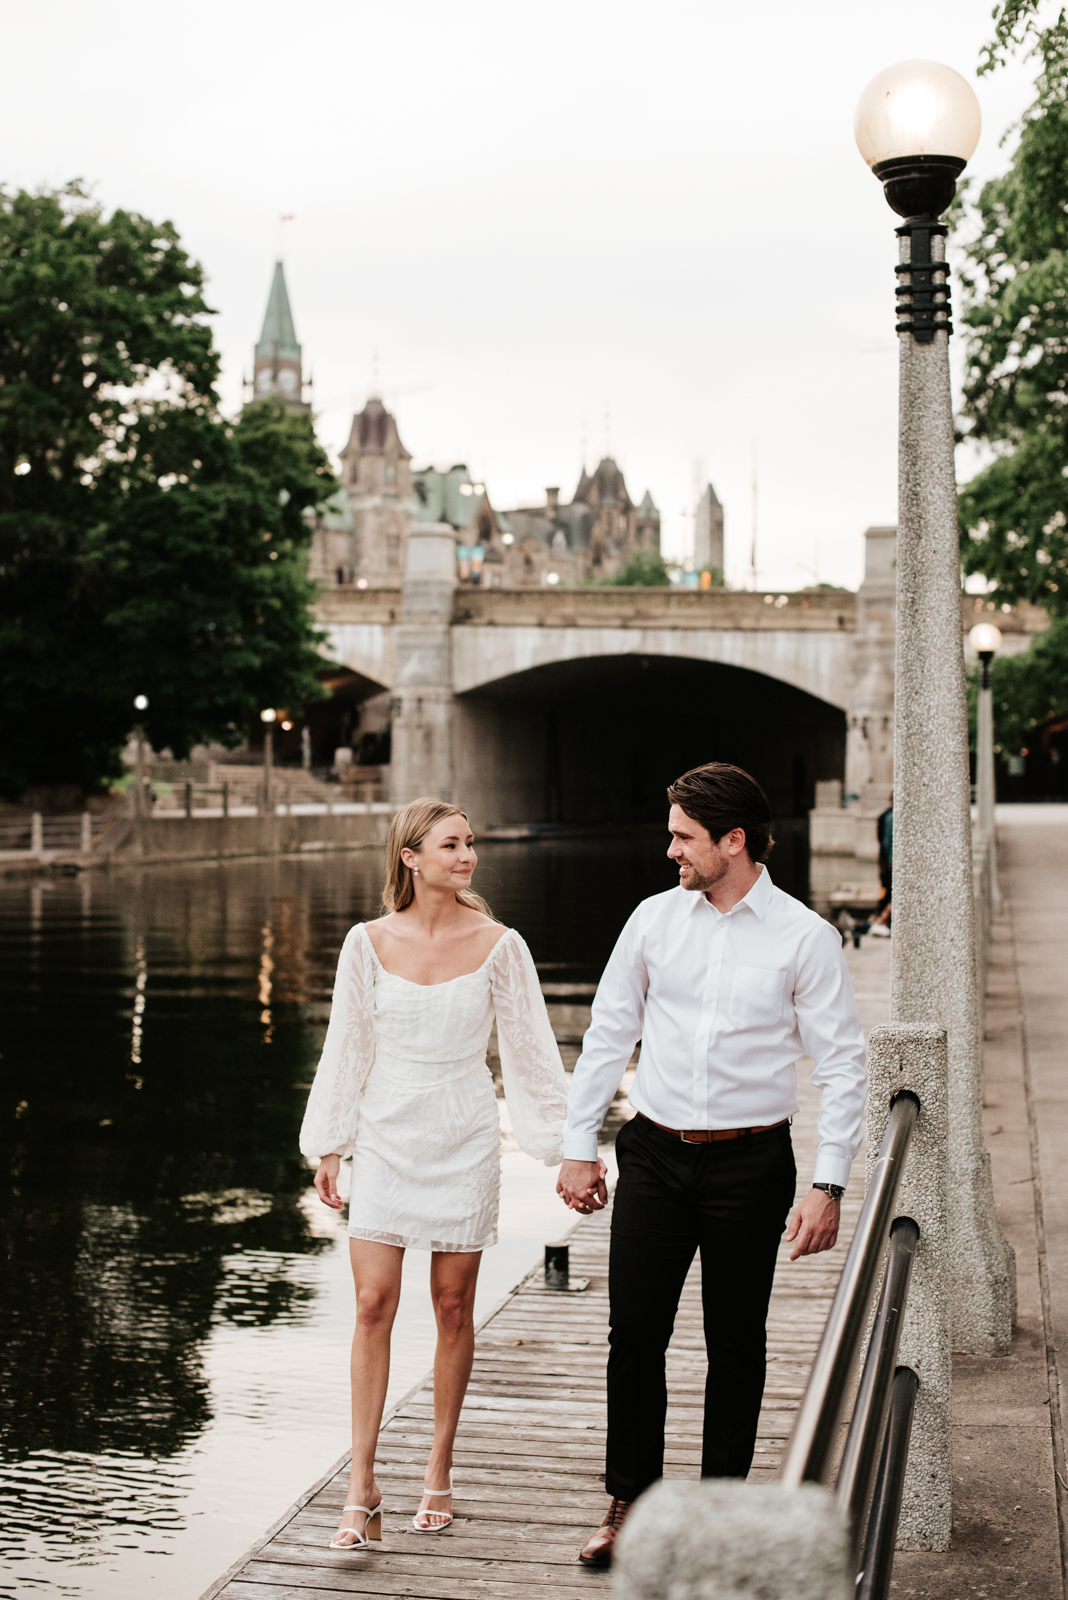 engaged couple holding hands by the rideau canal locks at sunset